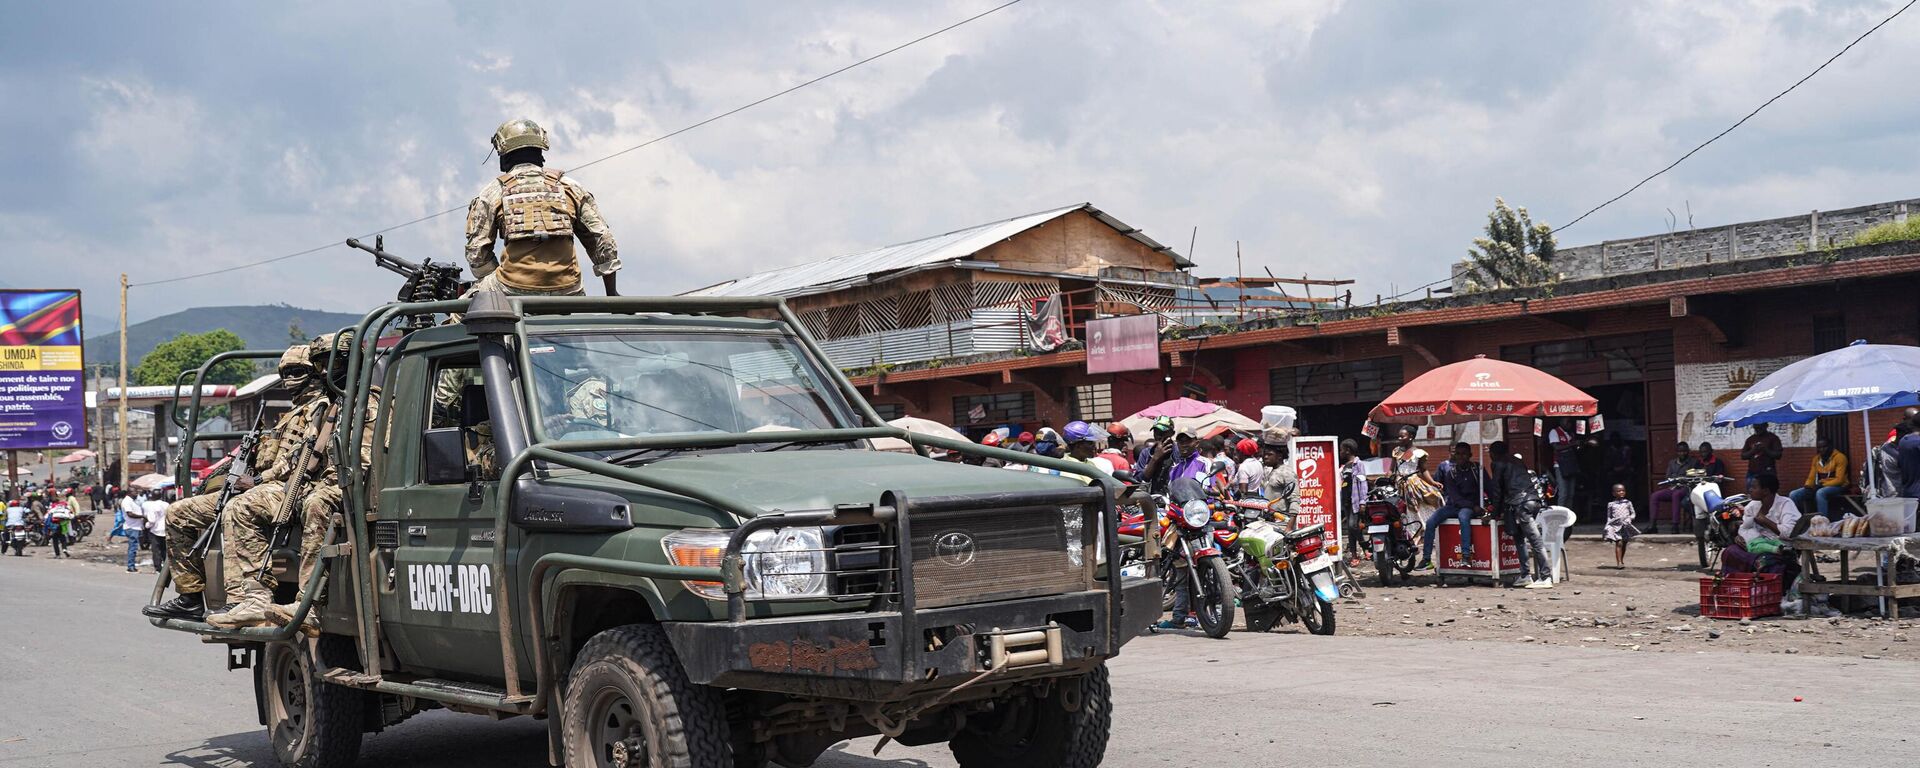 East African Community (EAC) force soldiers drive on a vehicle in Goma, eastern Democratic Republic of Congo, on December 2, 2022 - Sputnik International, 1920, 22.12.2022